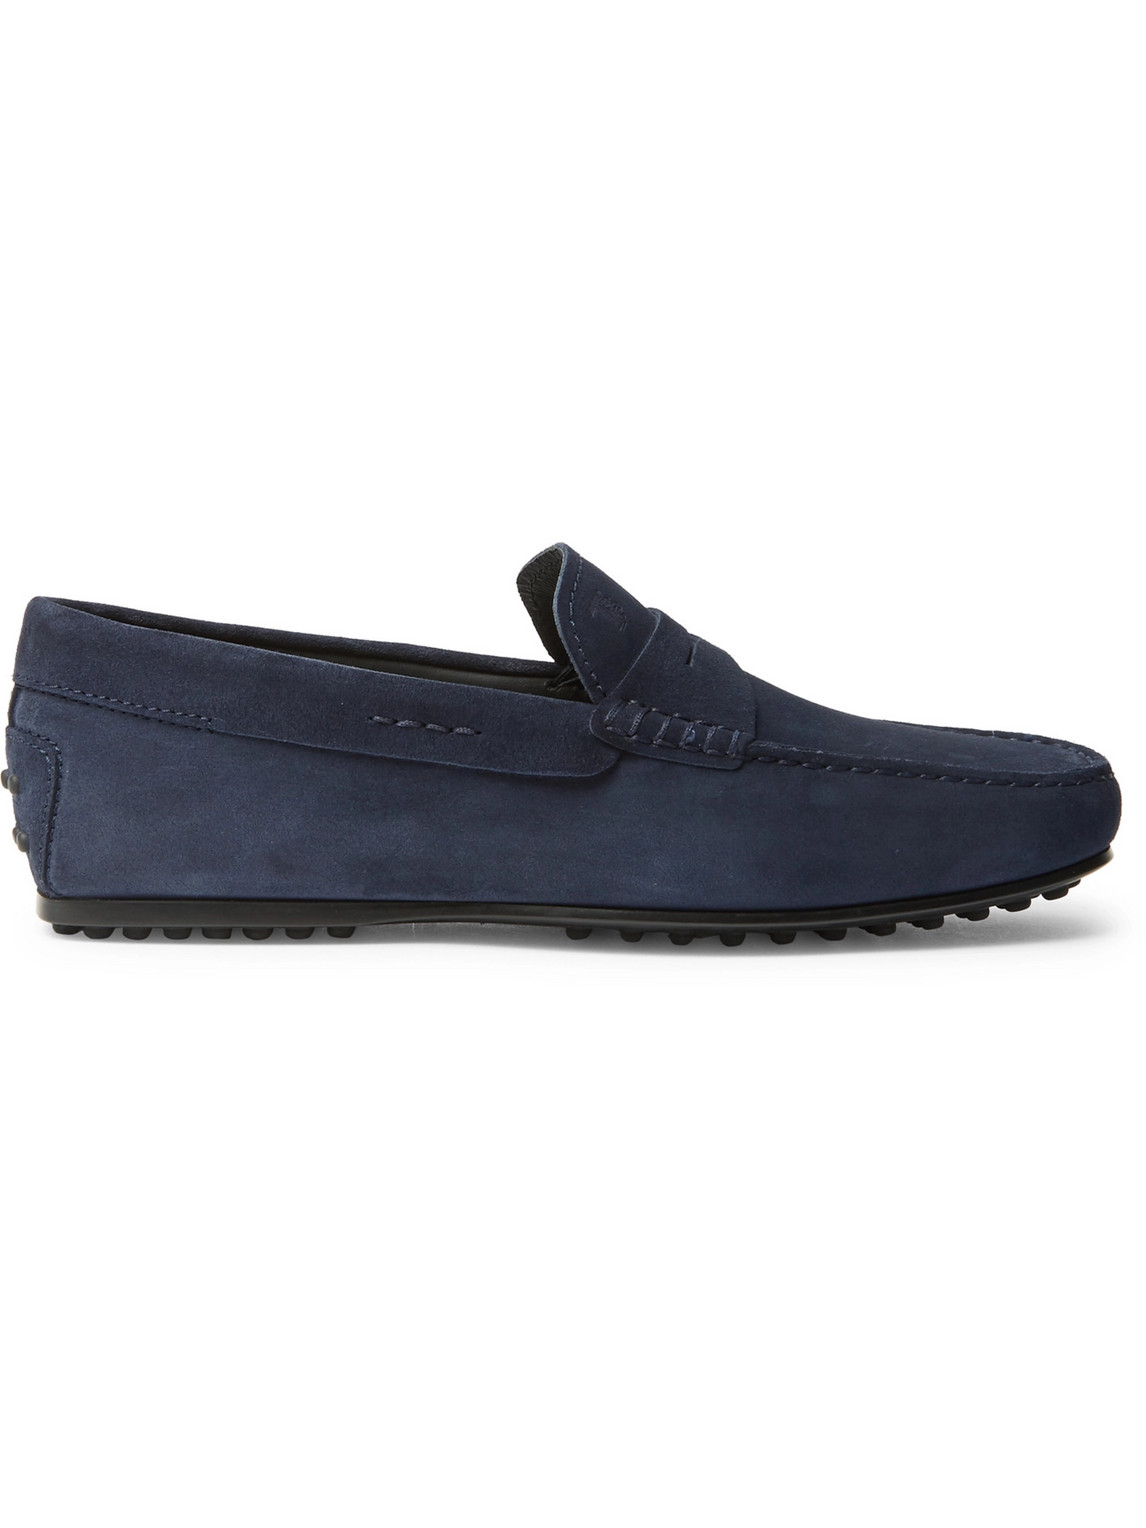 Tod's - Gommino Suede Driving Shoes - Men - Blue - UK 7.5 von Tod's